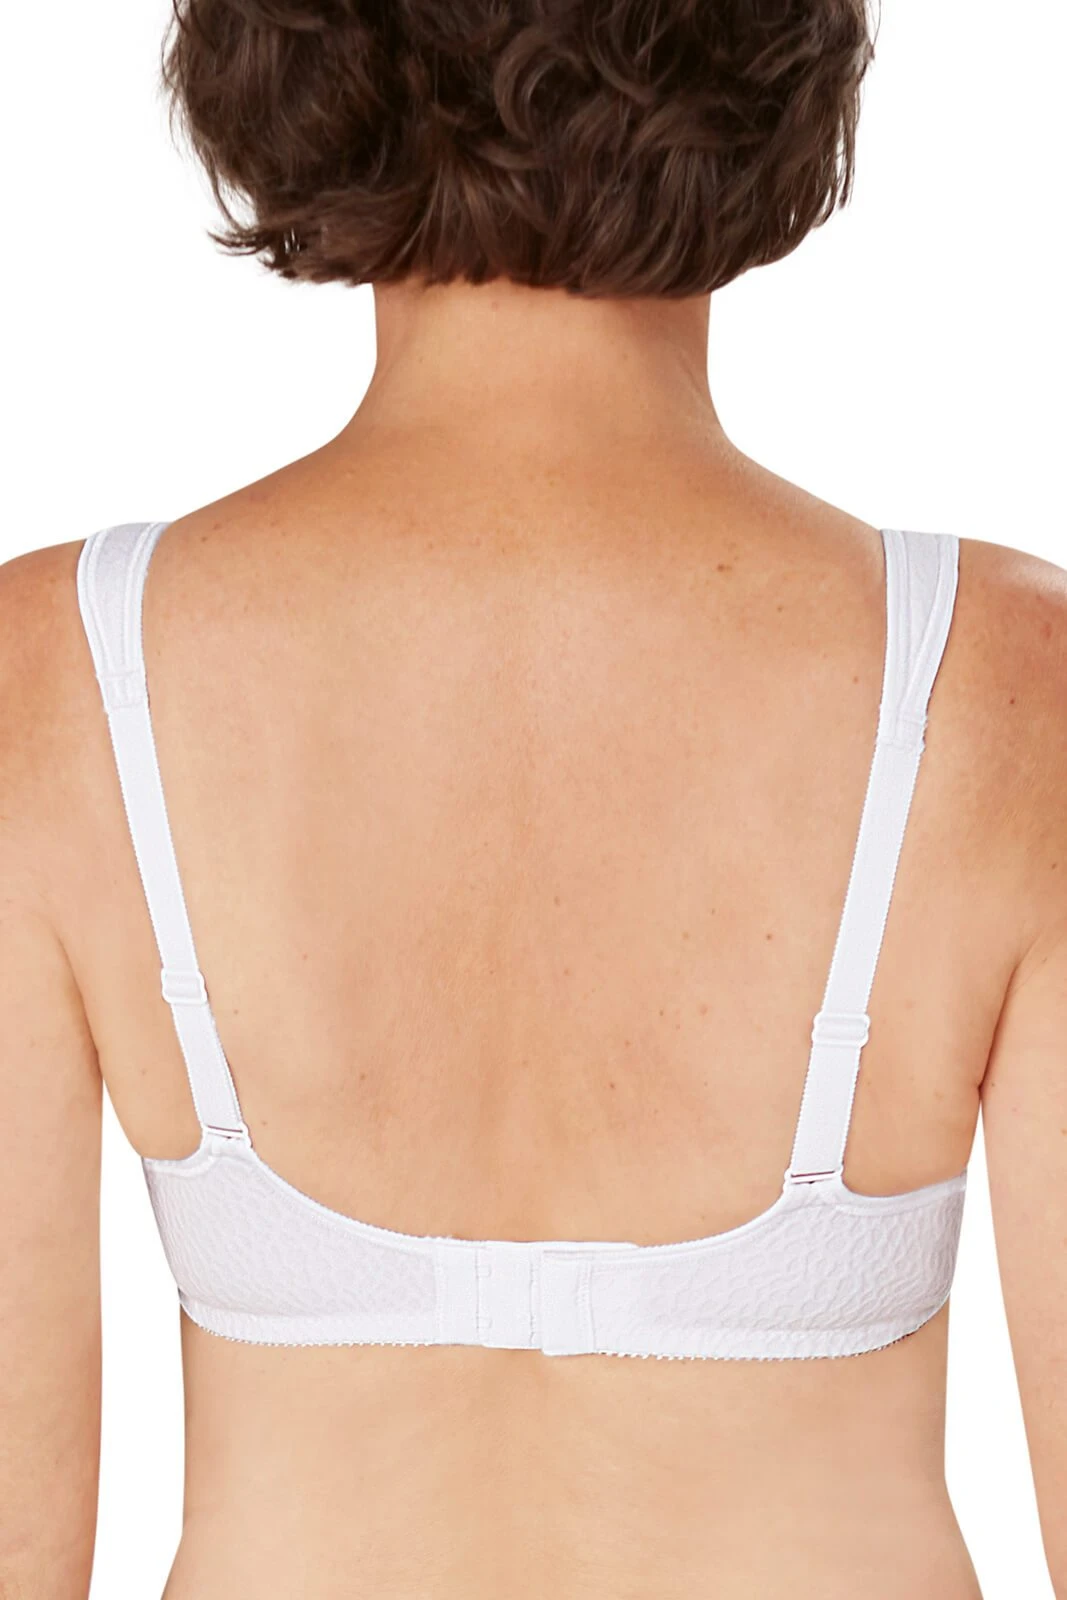 Amoena Greta WireFree Bra, Soft Cup, Front and Back Closure, Size 42B,  White Ref# 5212442BWH - MAR-J Medical Supply, Inc.